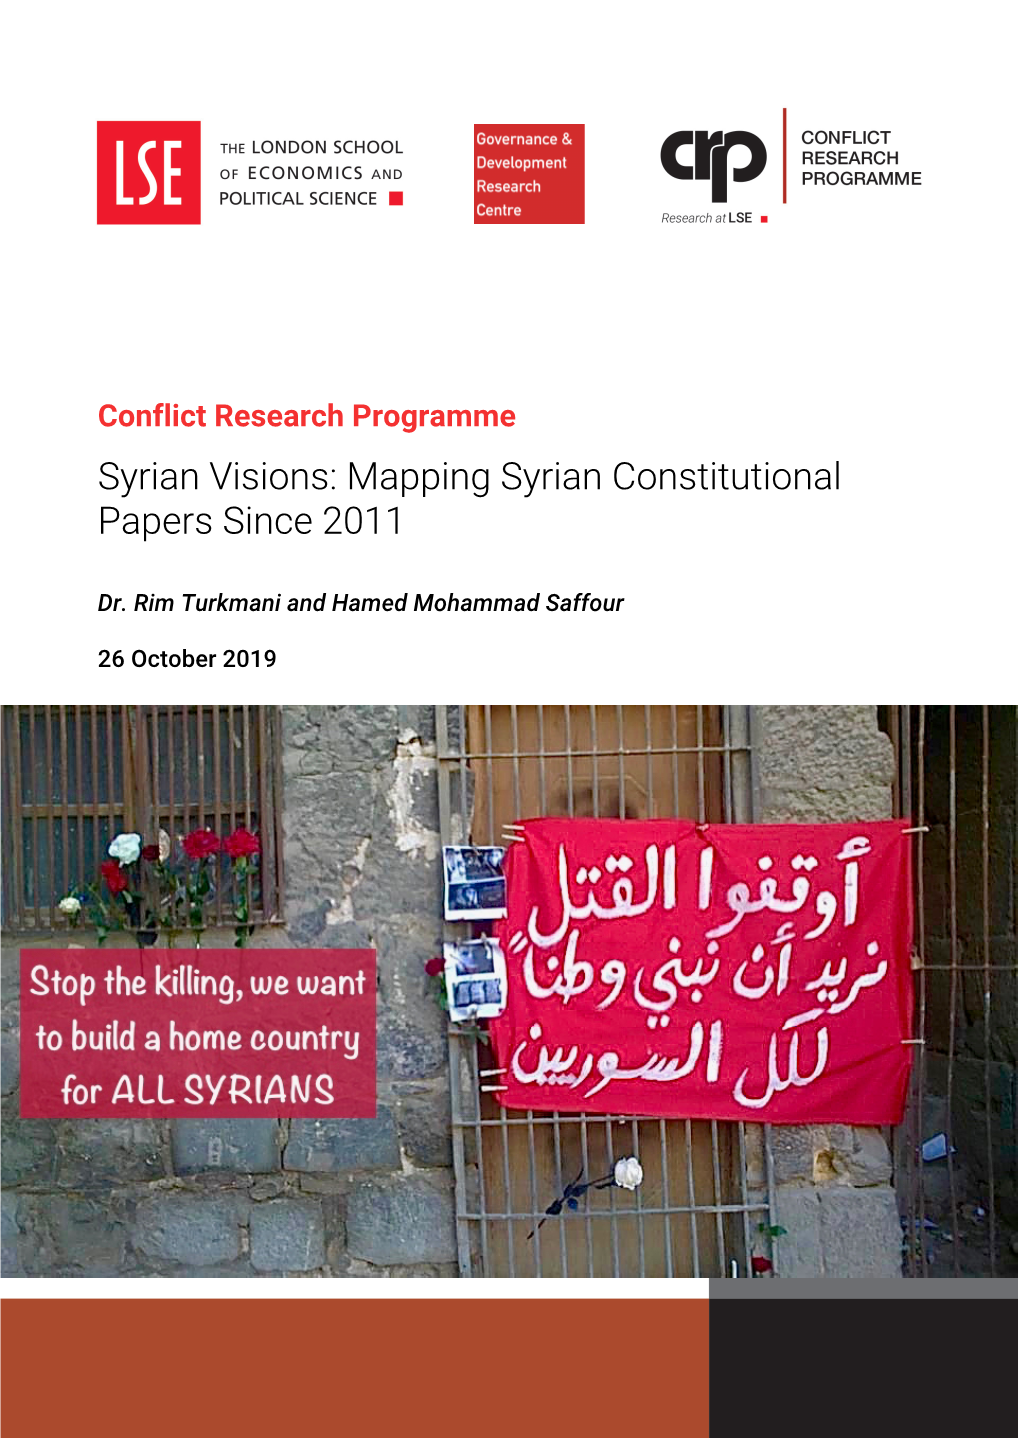 Mapping Syrian Constitutional Papers Since 2011